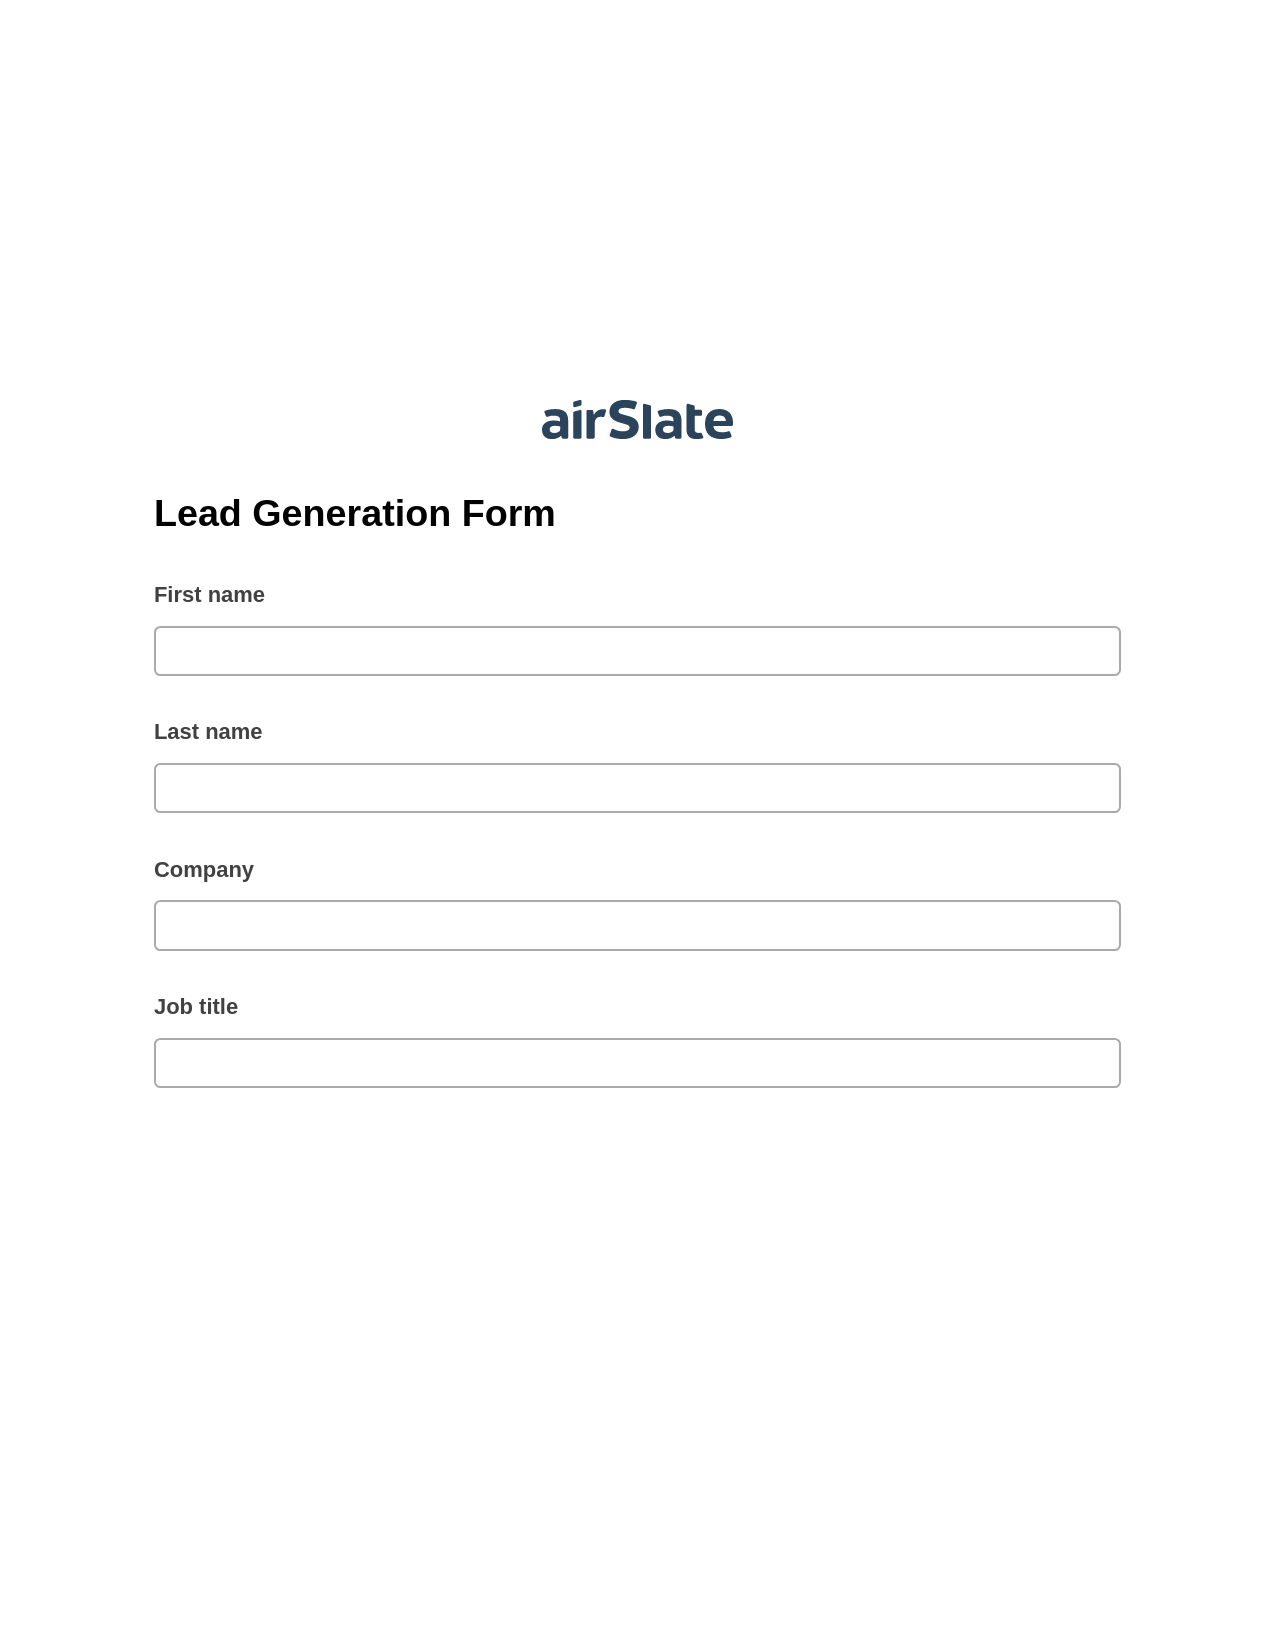 Lead Generation Form Pre-fill from MySQL Bot, Roles Reminder Bot, Archive to Google Drive Bot